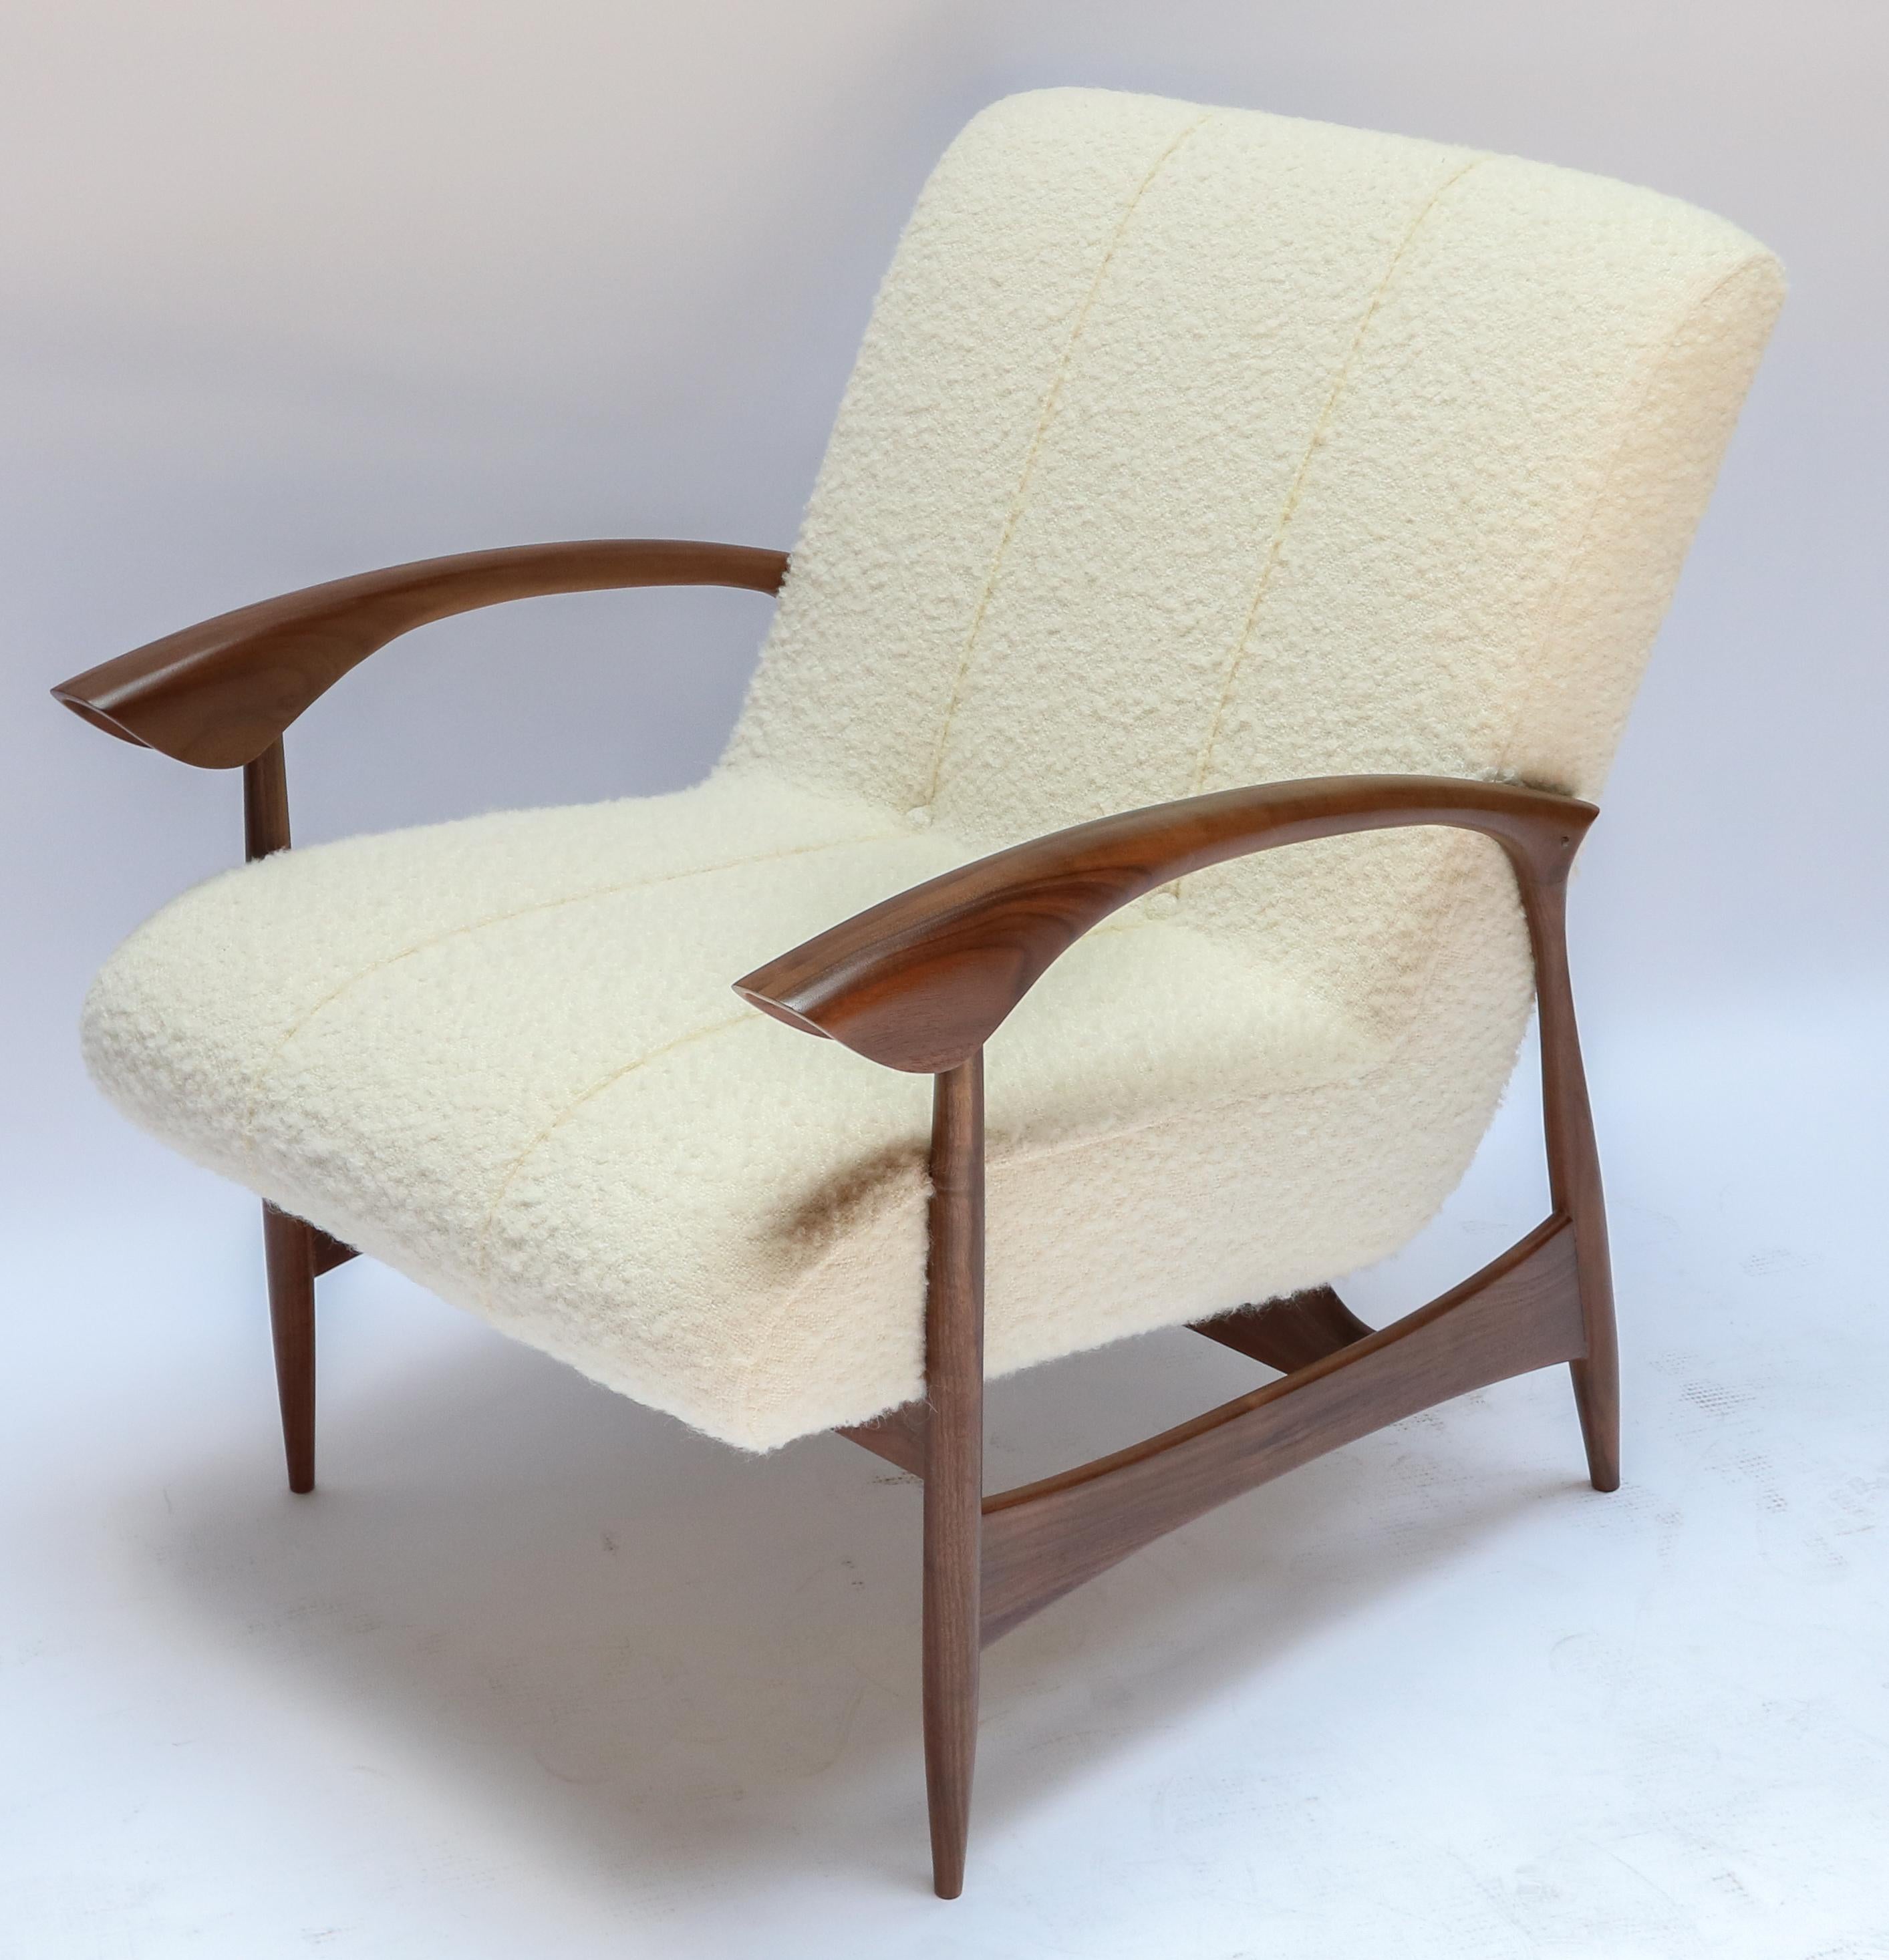 Pair of custom armchairs in American Walnut and Italian ivory boucle.  Made in Los Angeles by Adesso Imports. Can be done in different woods, finishes and fabrics.